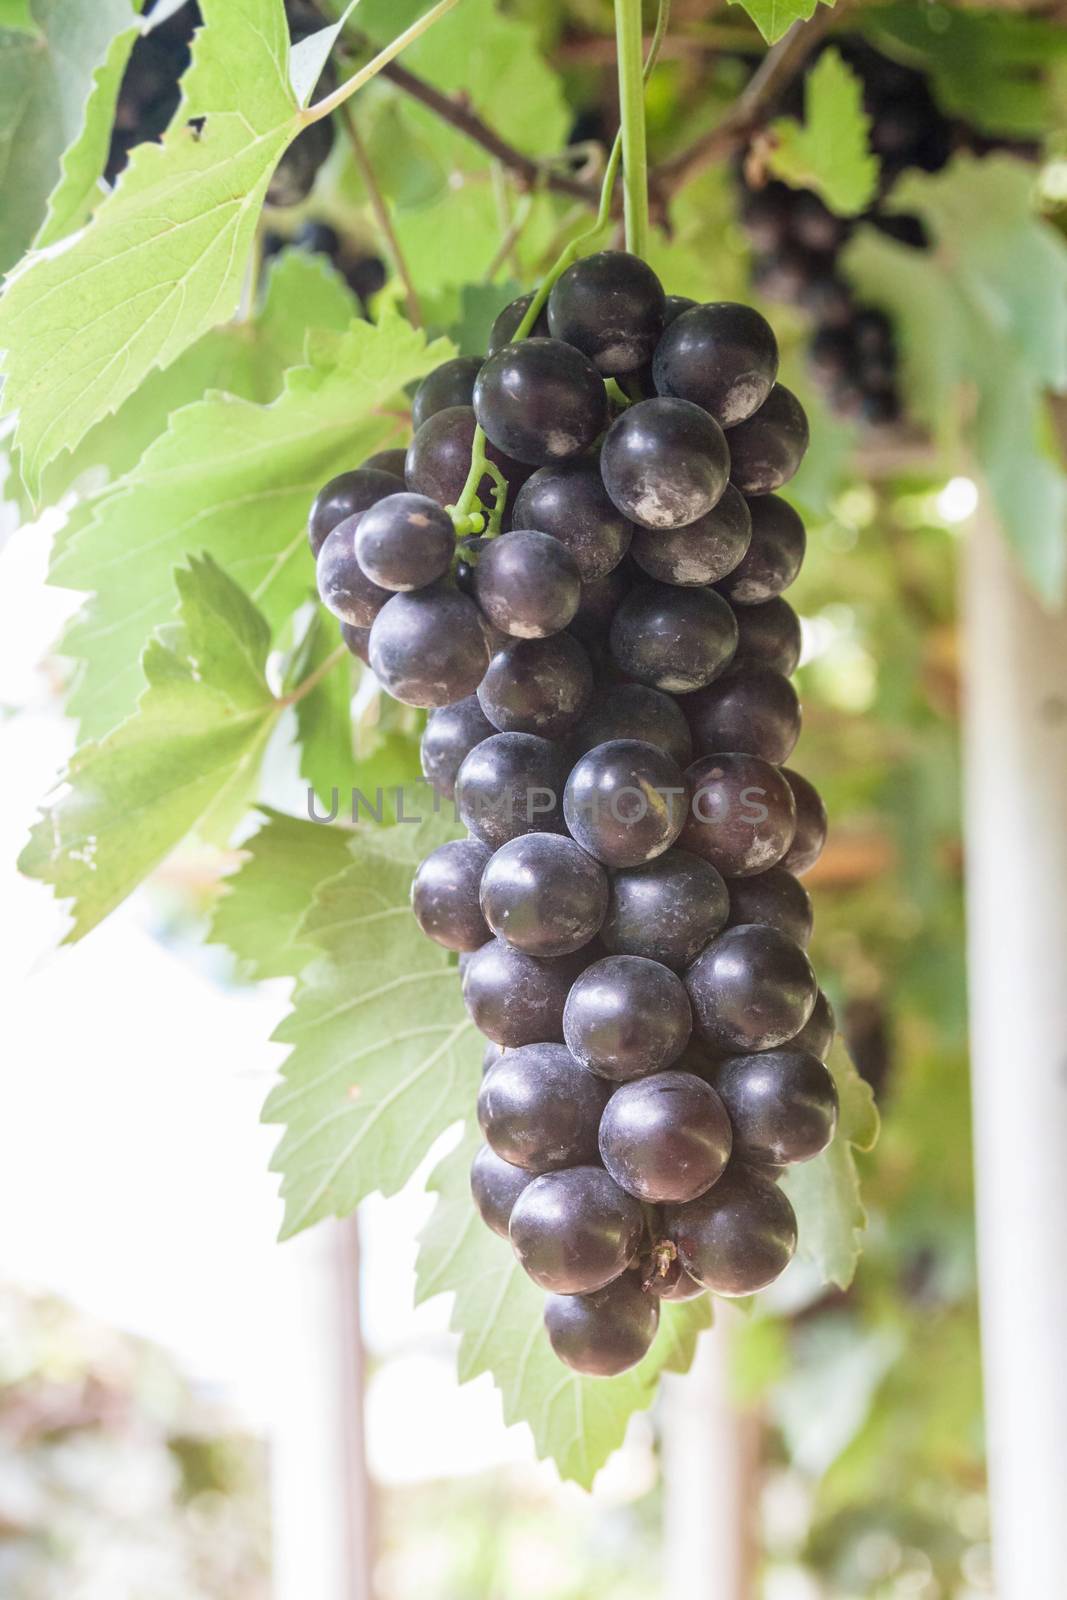 bunch of grapes on the vine with green leaves